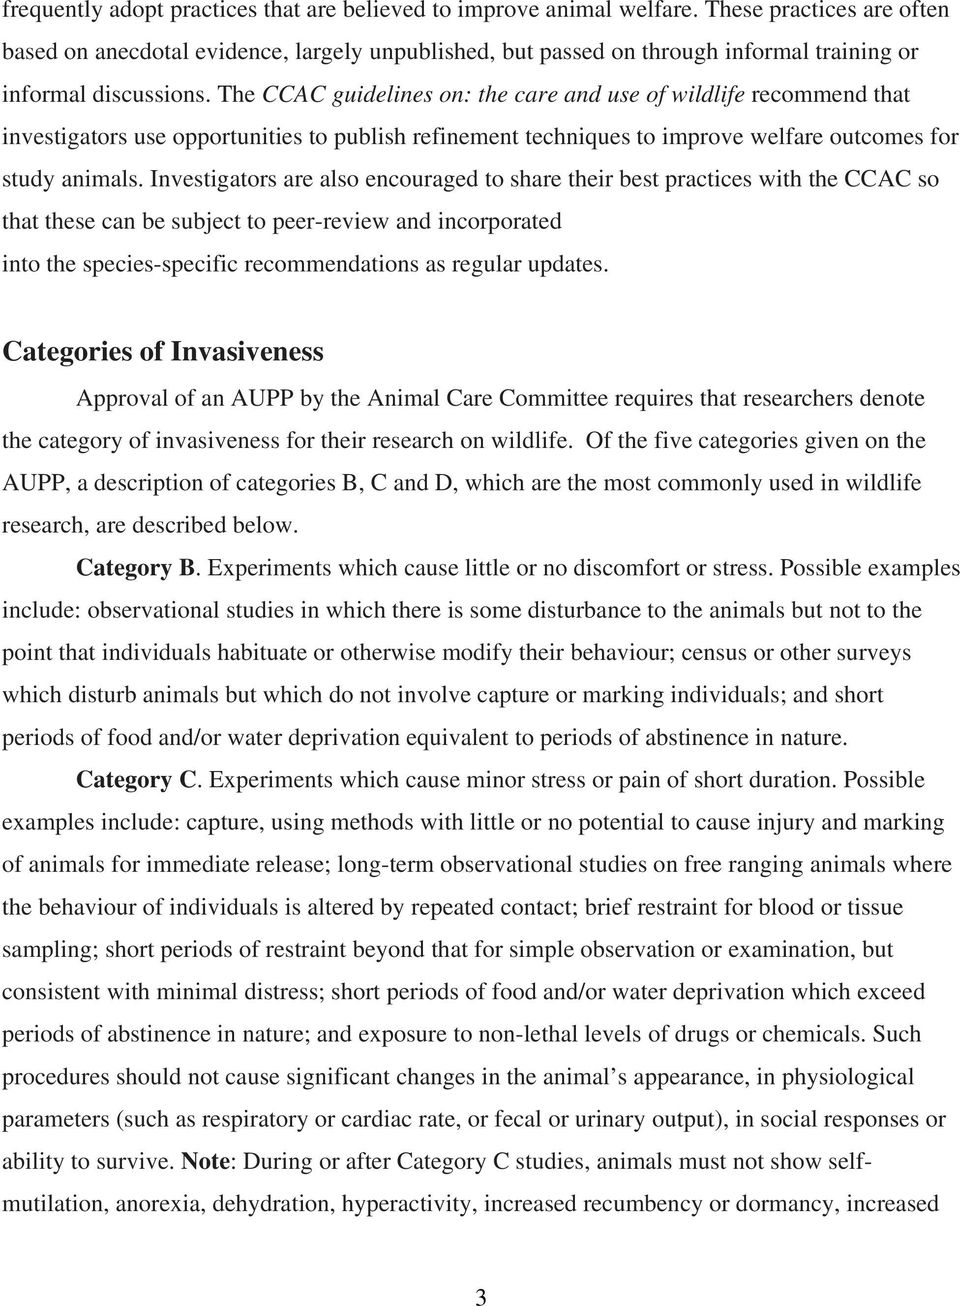 The CCAC guidelines on: the care and use of wildlife recommend that investigators use opportunities to publish refinement techniques to improve welfare outcomes for study animals.